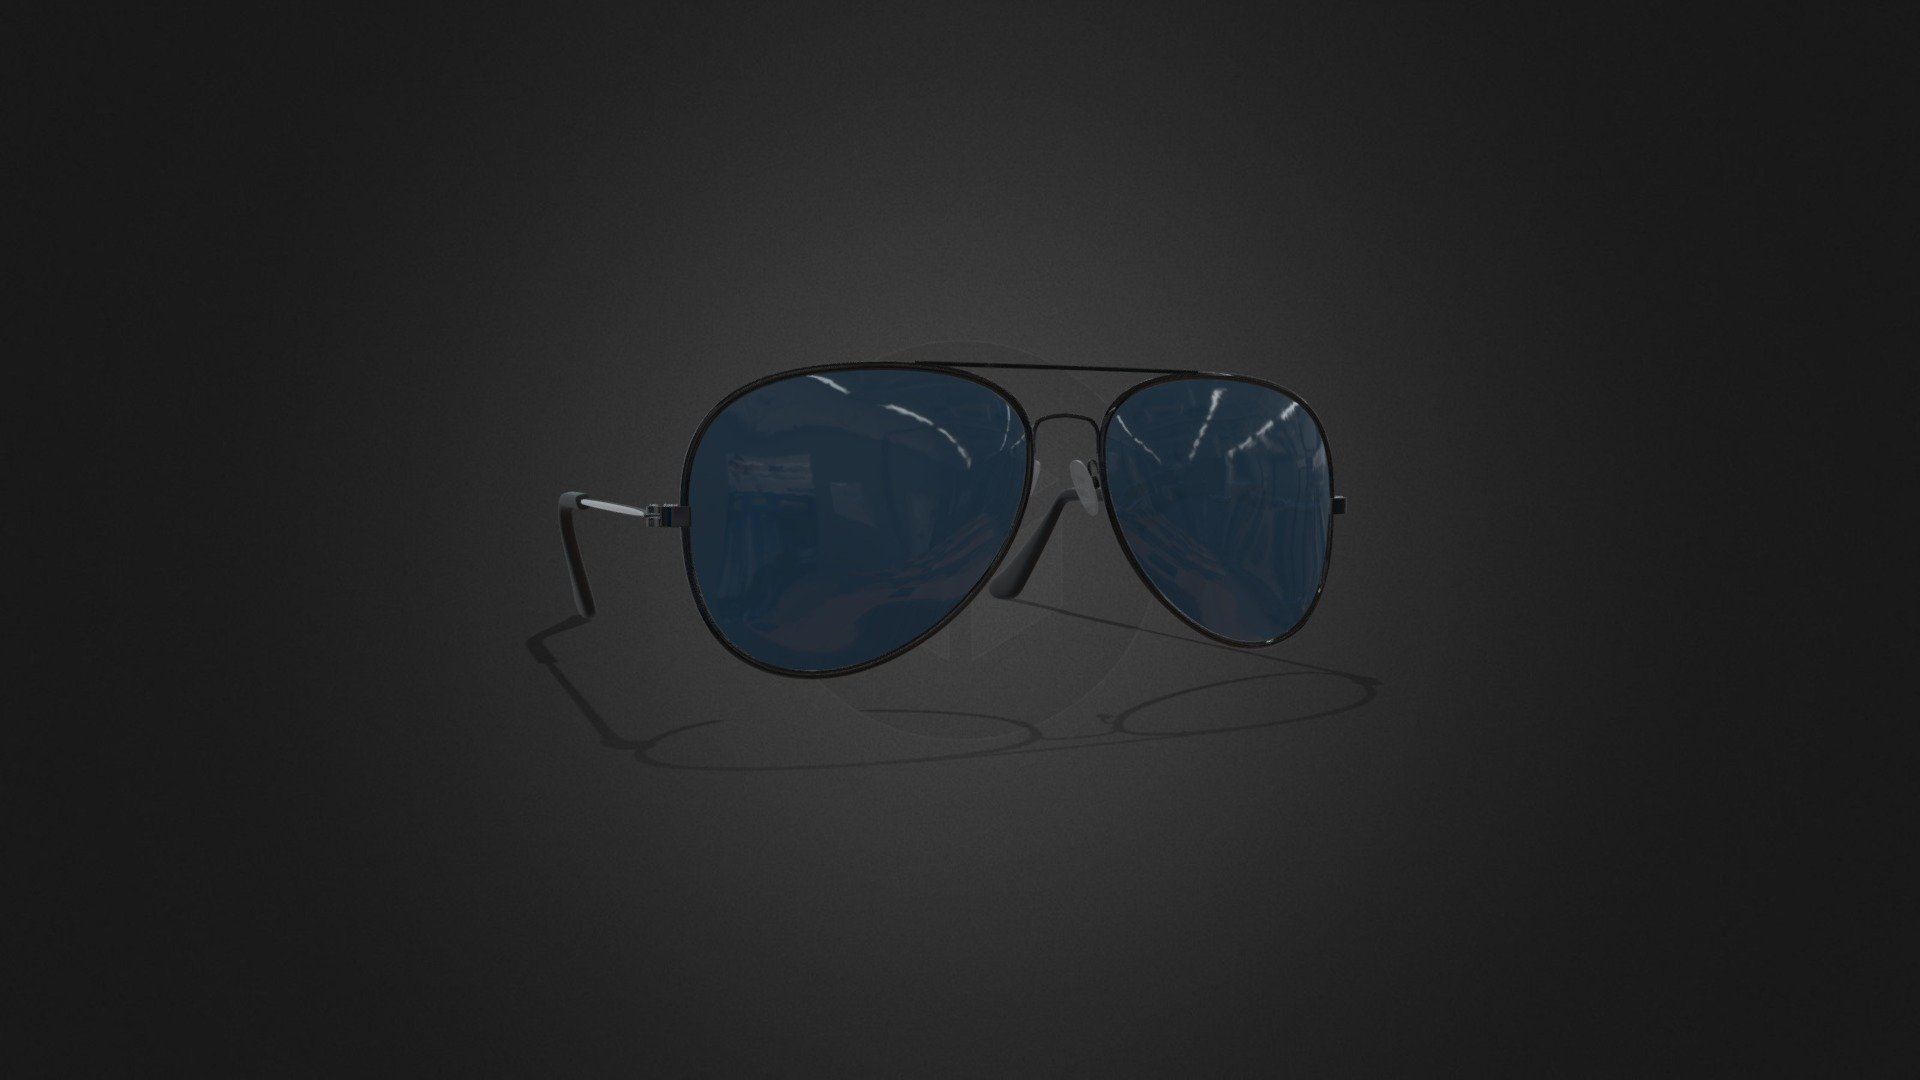 High resolution Aviator Sunglass model created and textured in Cinema 4d. This model is created especially for AR and VR. It can also be used in games, films, advertisement, and etc 3d model